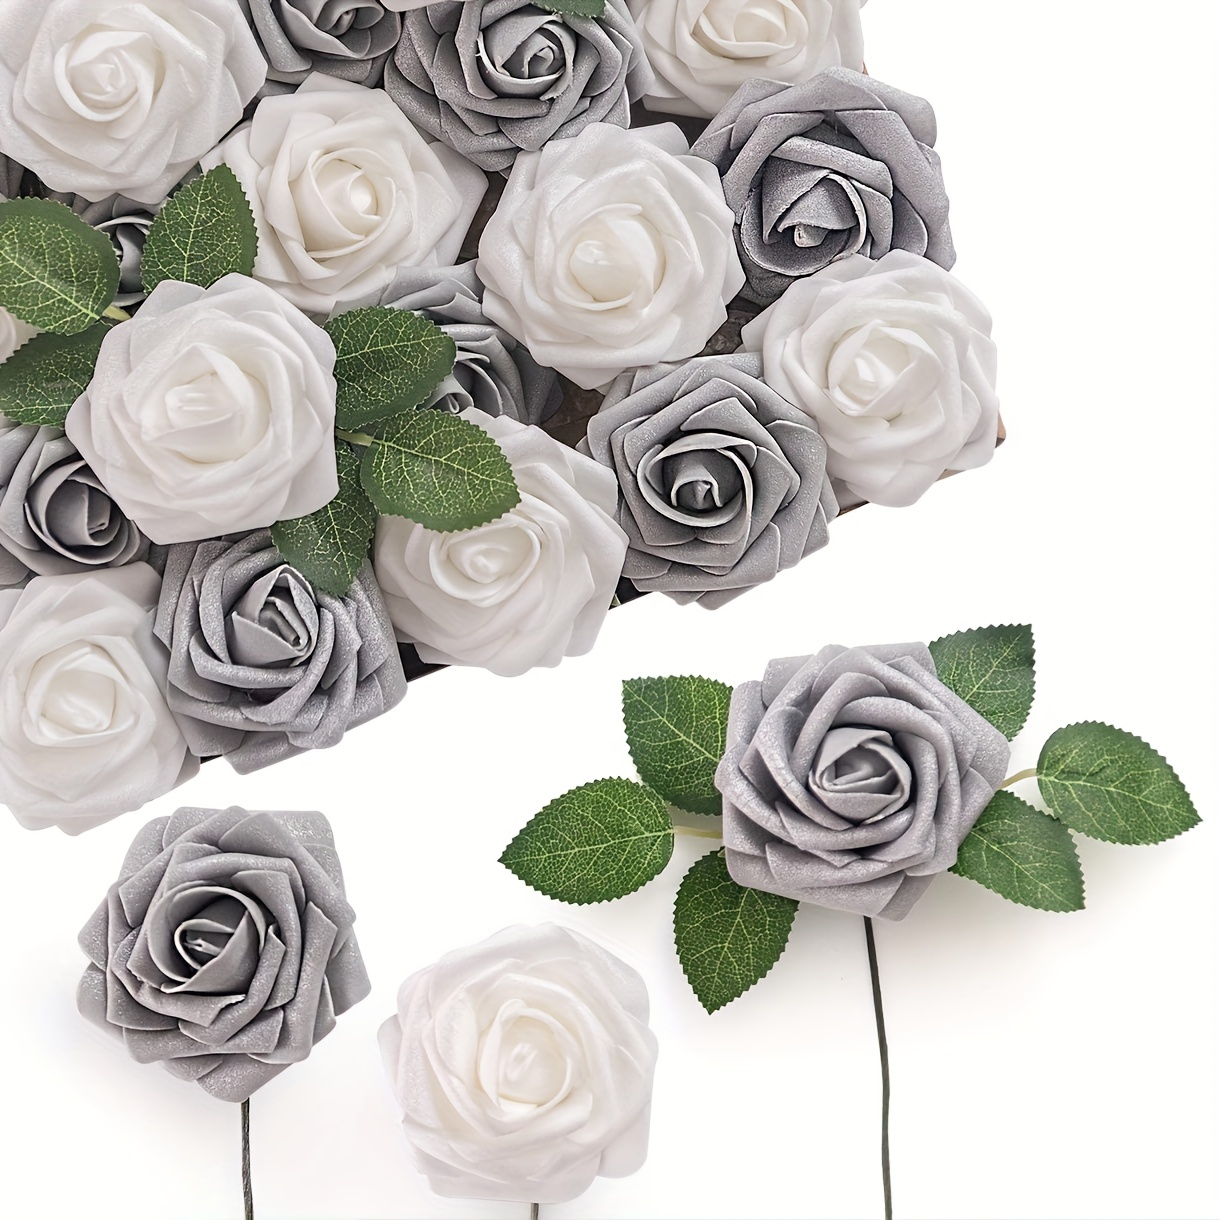 Black Roses Stock Photos and Images - 123RF